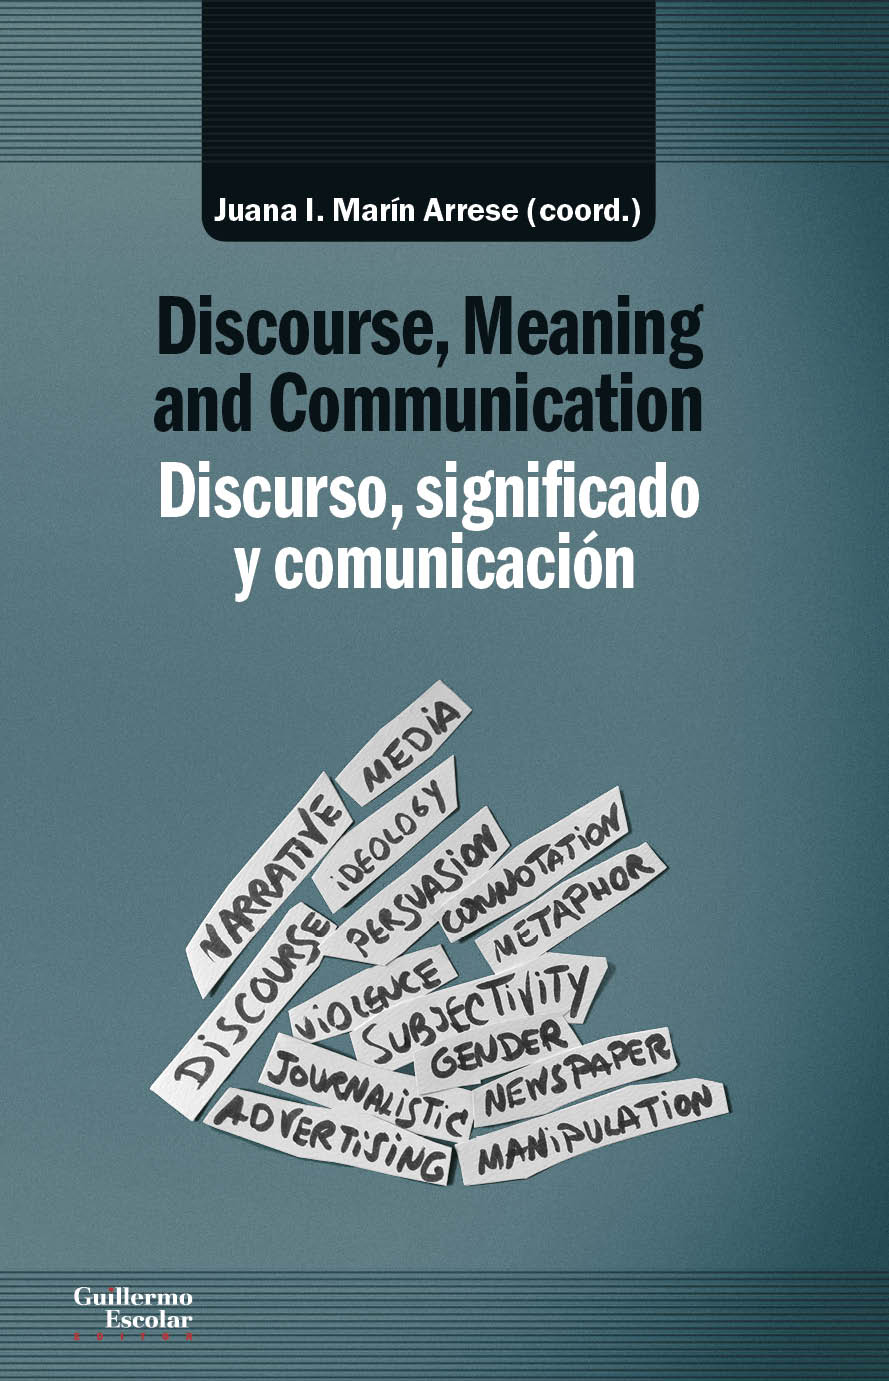 Discourse, meaning and communication